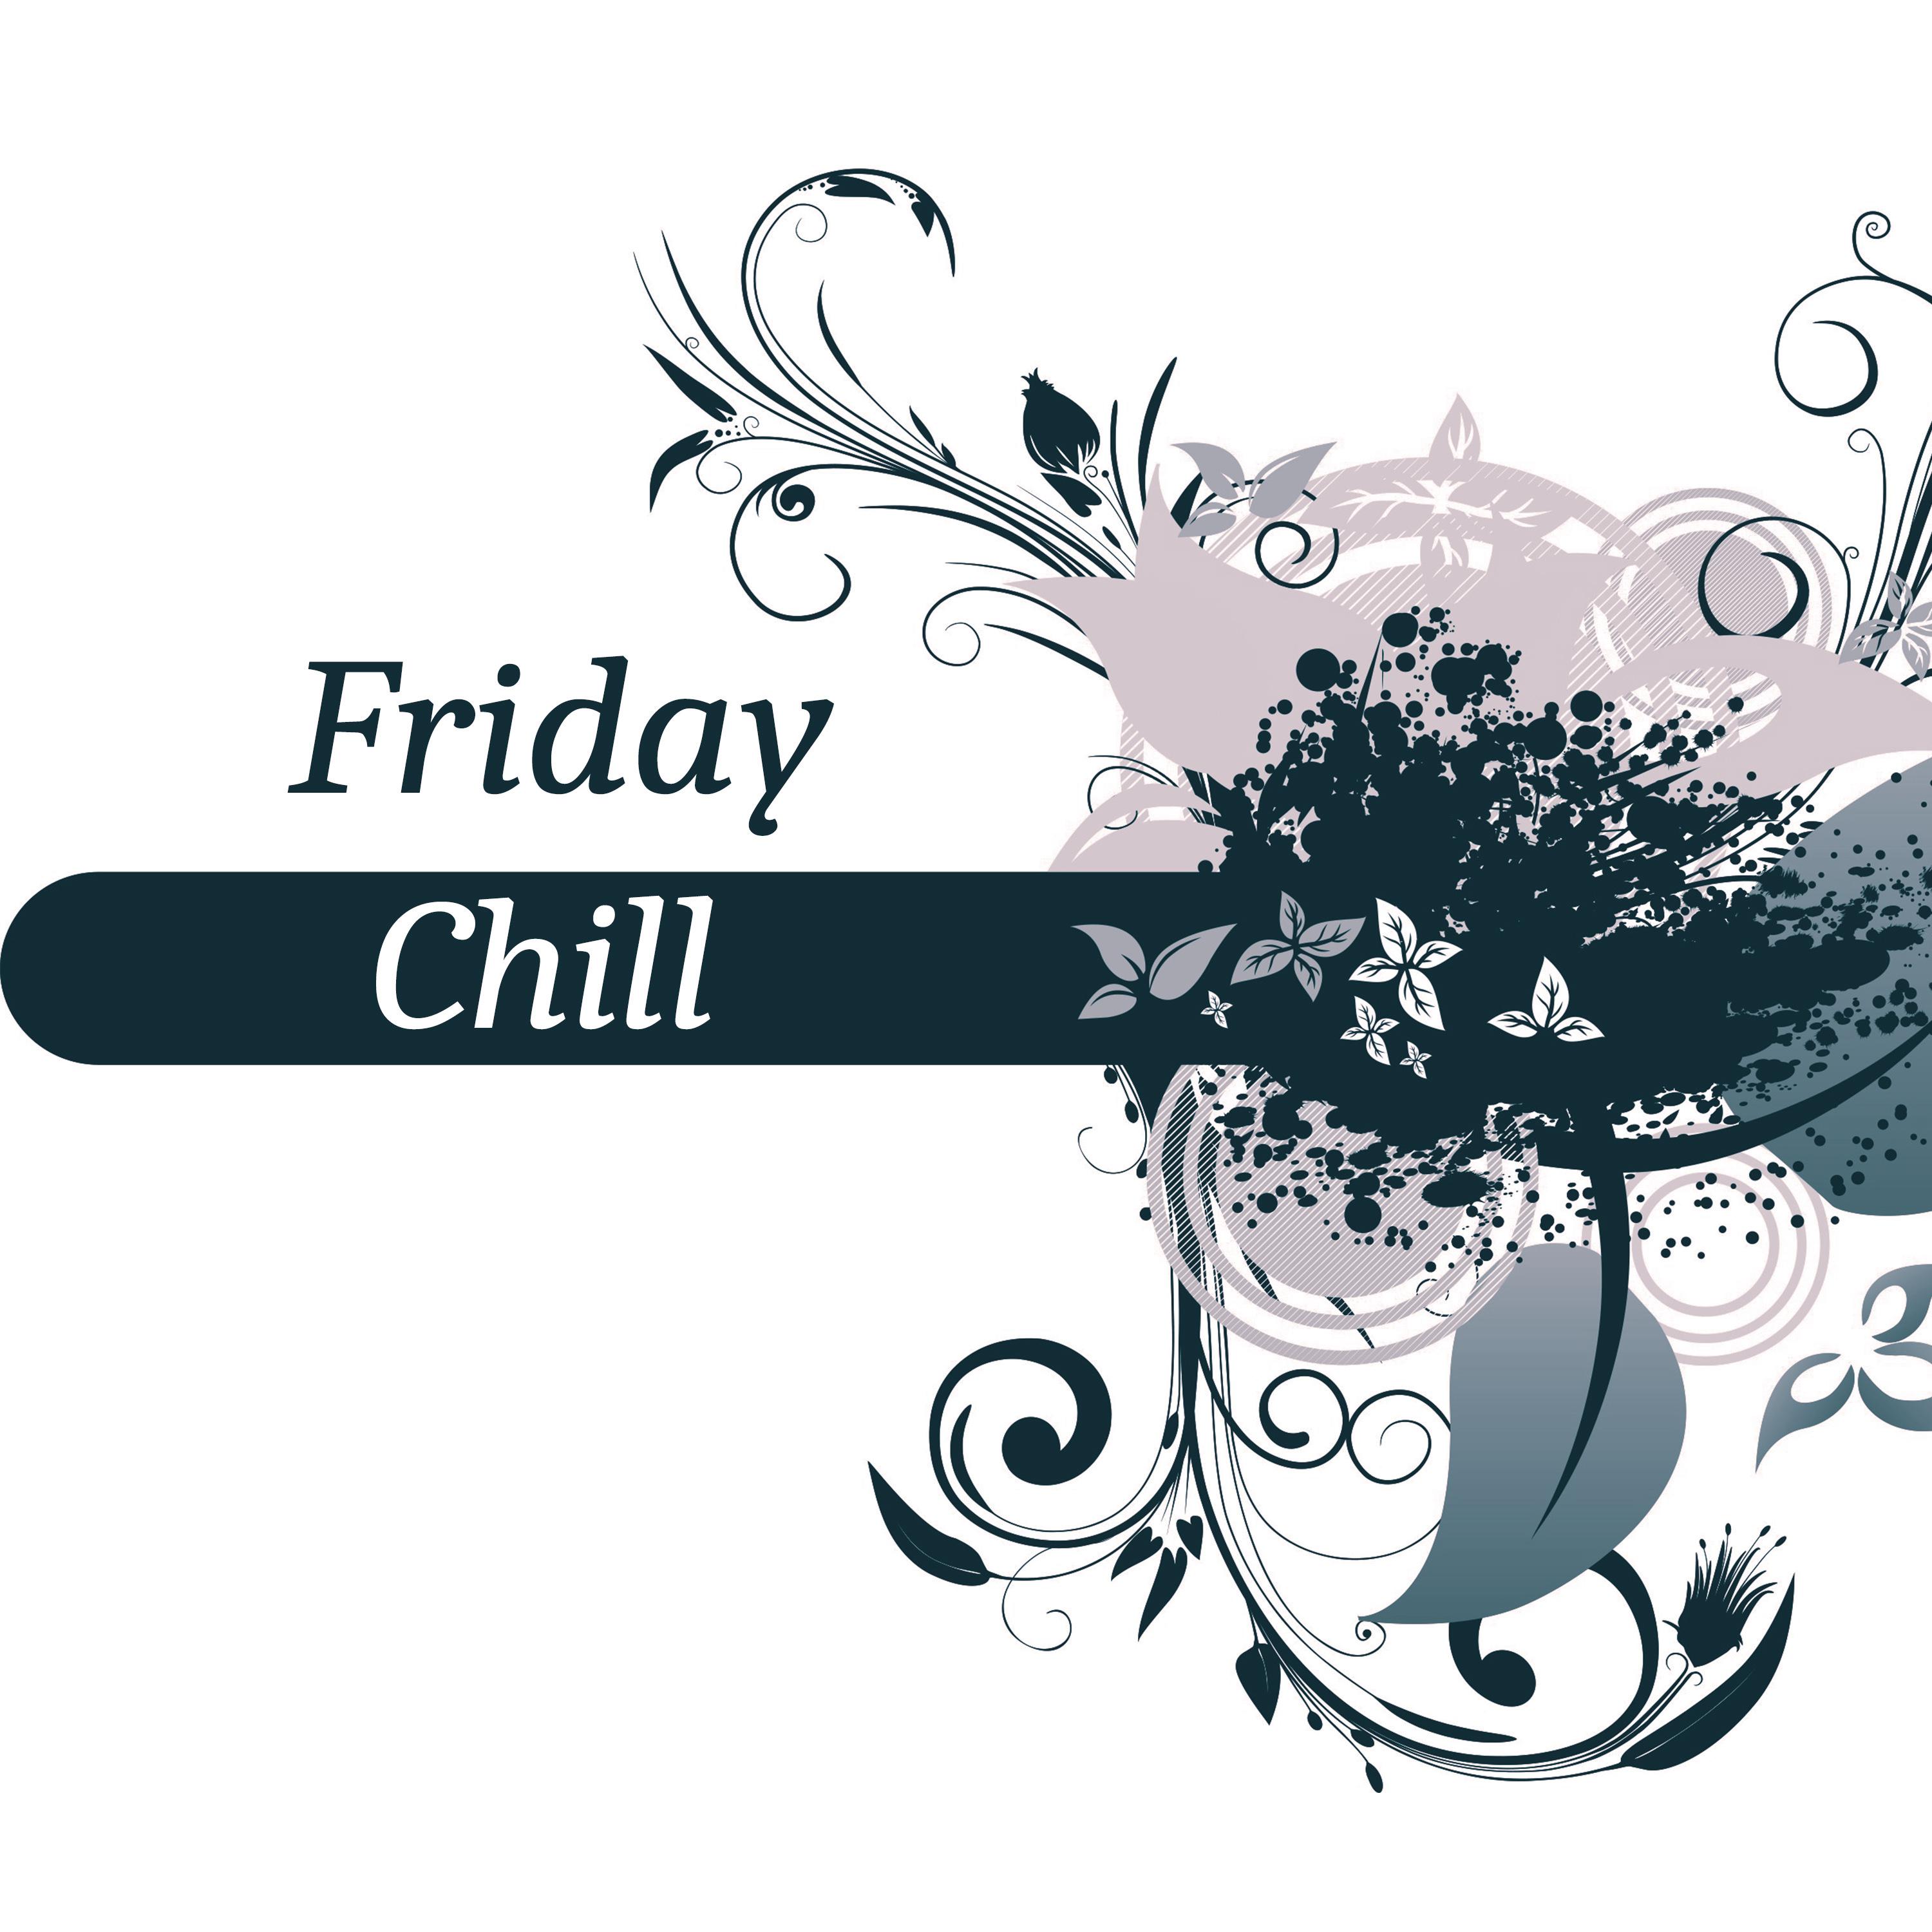 Friday Chill - Easy Listening Chillout, Electronic Sounds, Free Chill Out Music, Just Relax